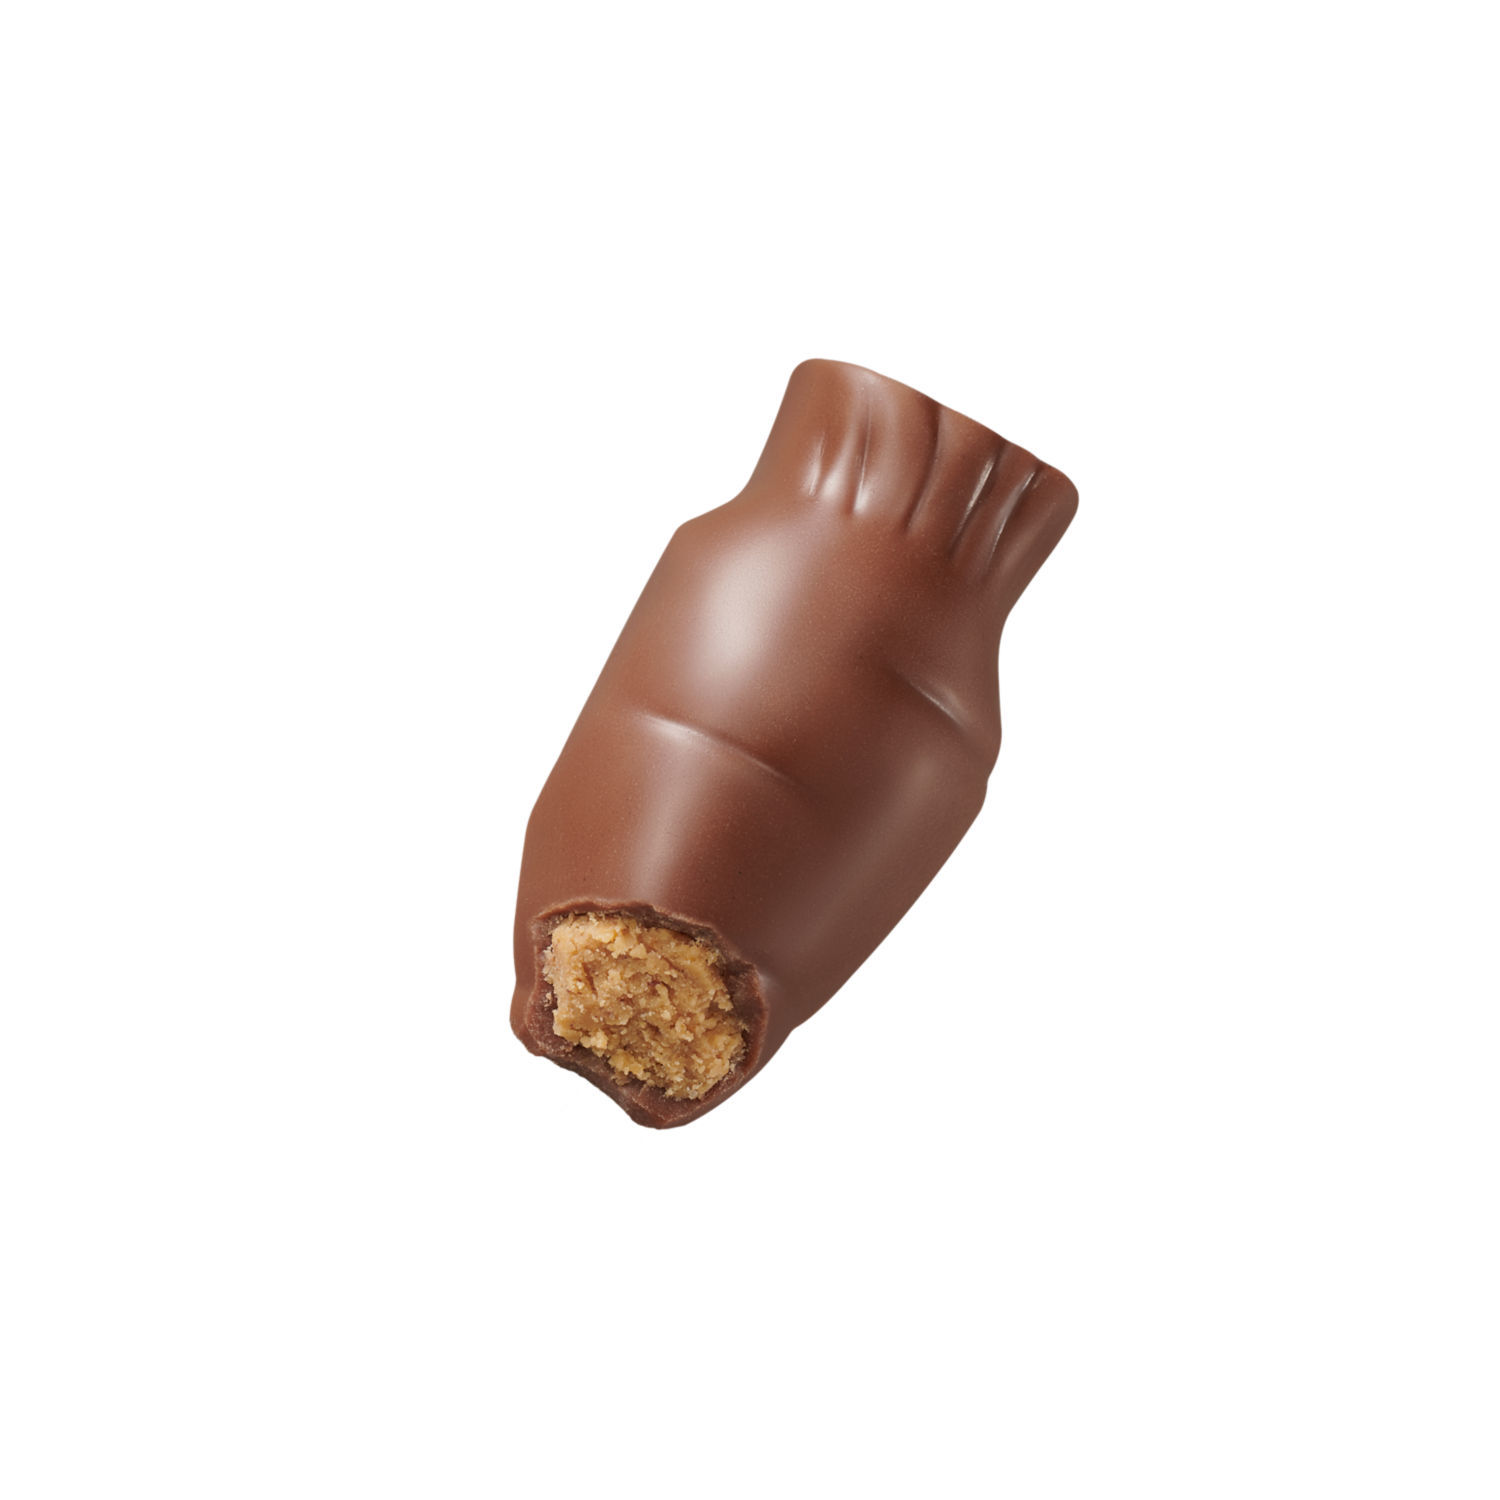 Reese's Milk Chocolate Peanut Butter Creme Carrots Easter Candy, Bag 9 oz - image 3 of 8